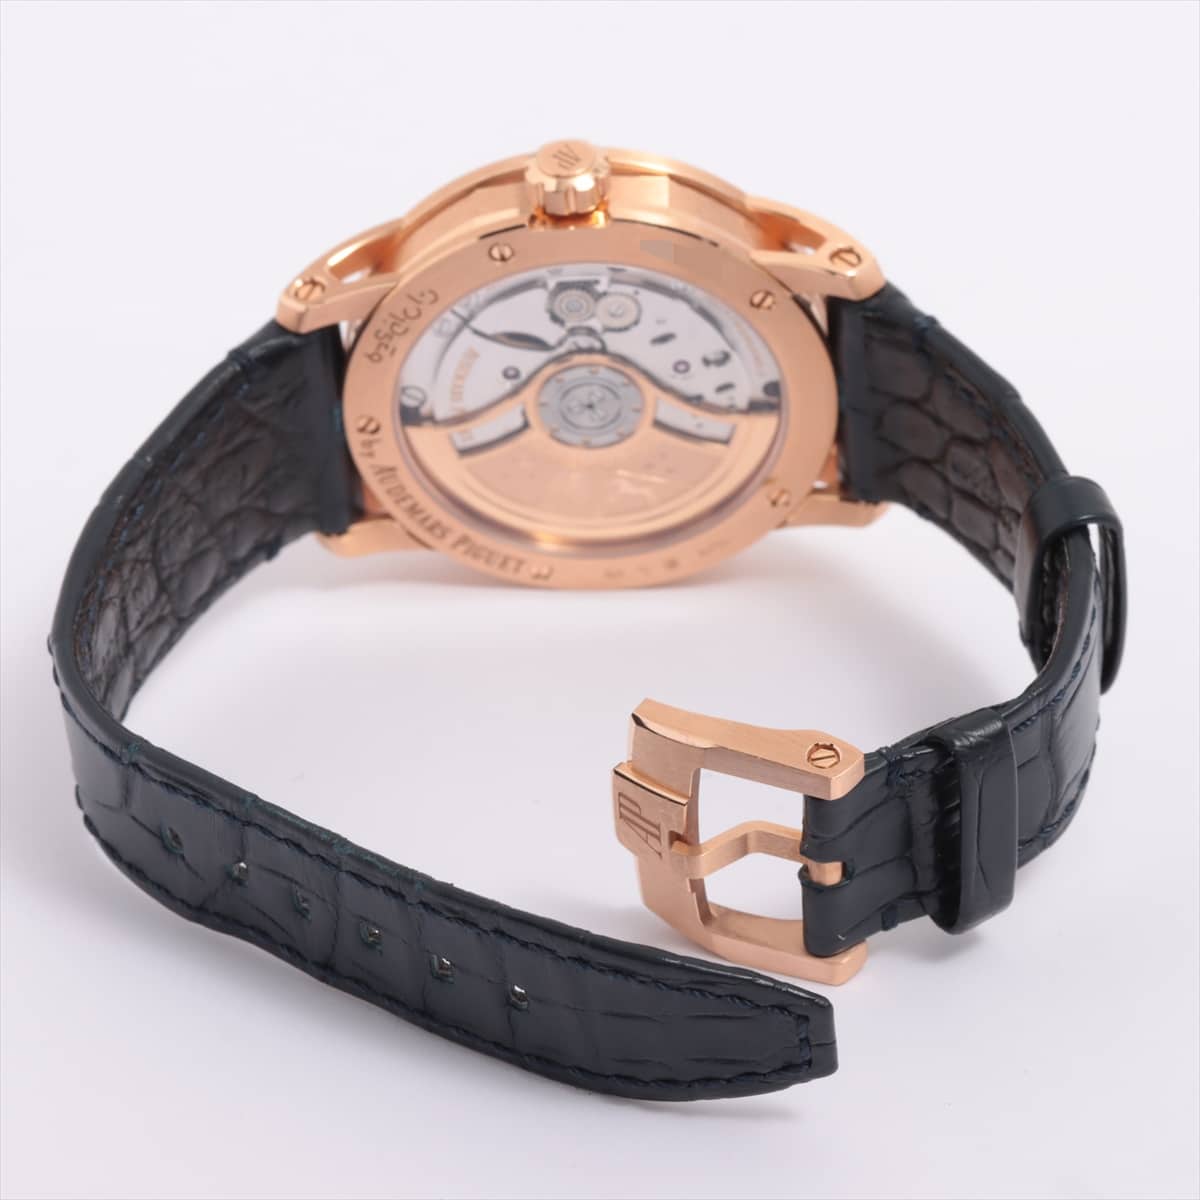 Audemars Piguet CODE11.59 15210OR.OO.A028CR.01  750 & leather AT Blue-Face